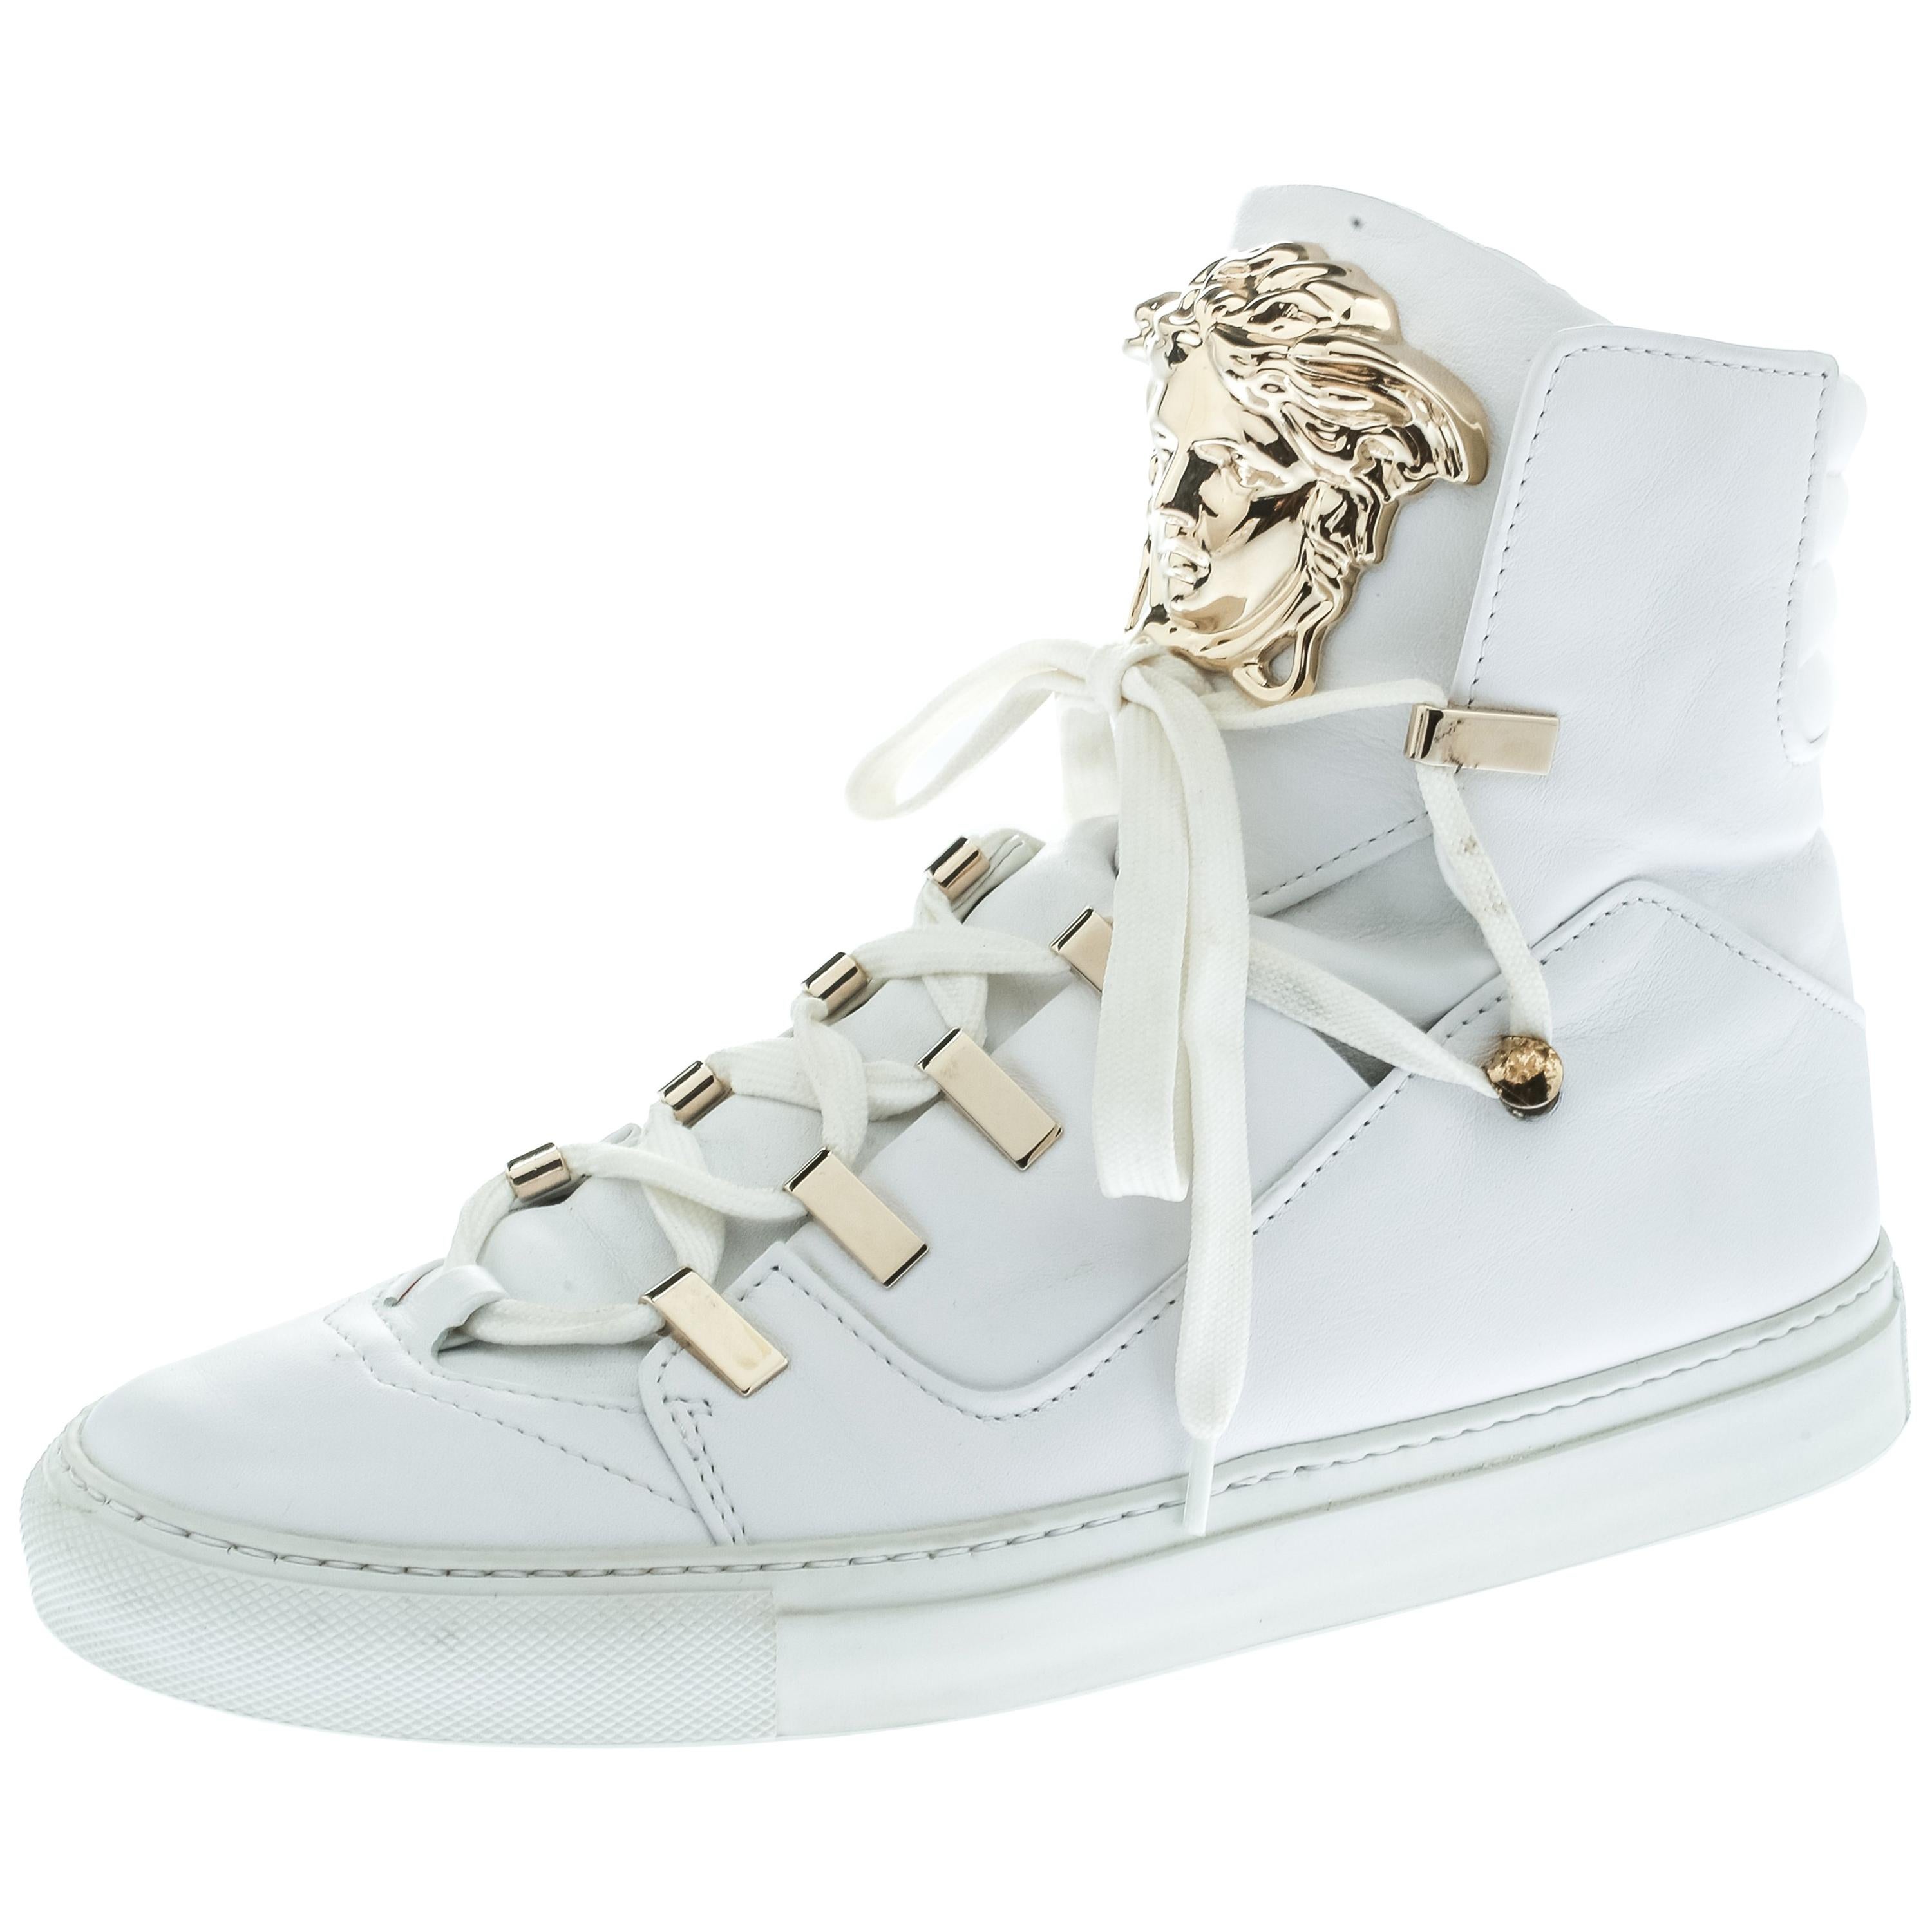 Versace White Leather Medusa High Top Sneakers Size 39